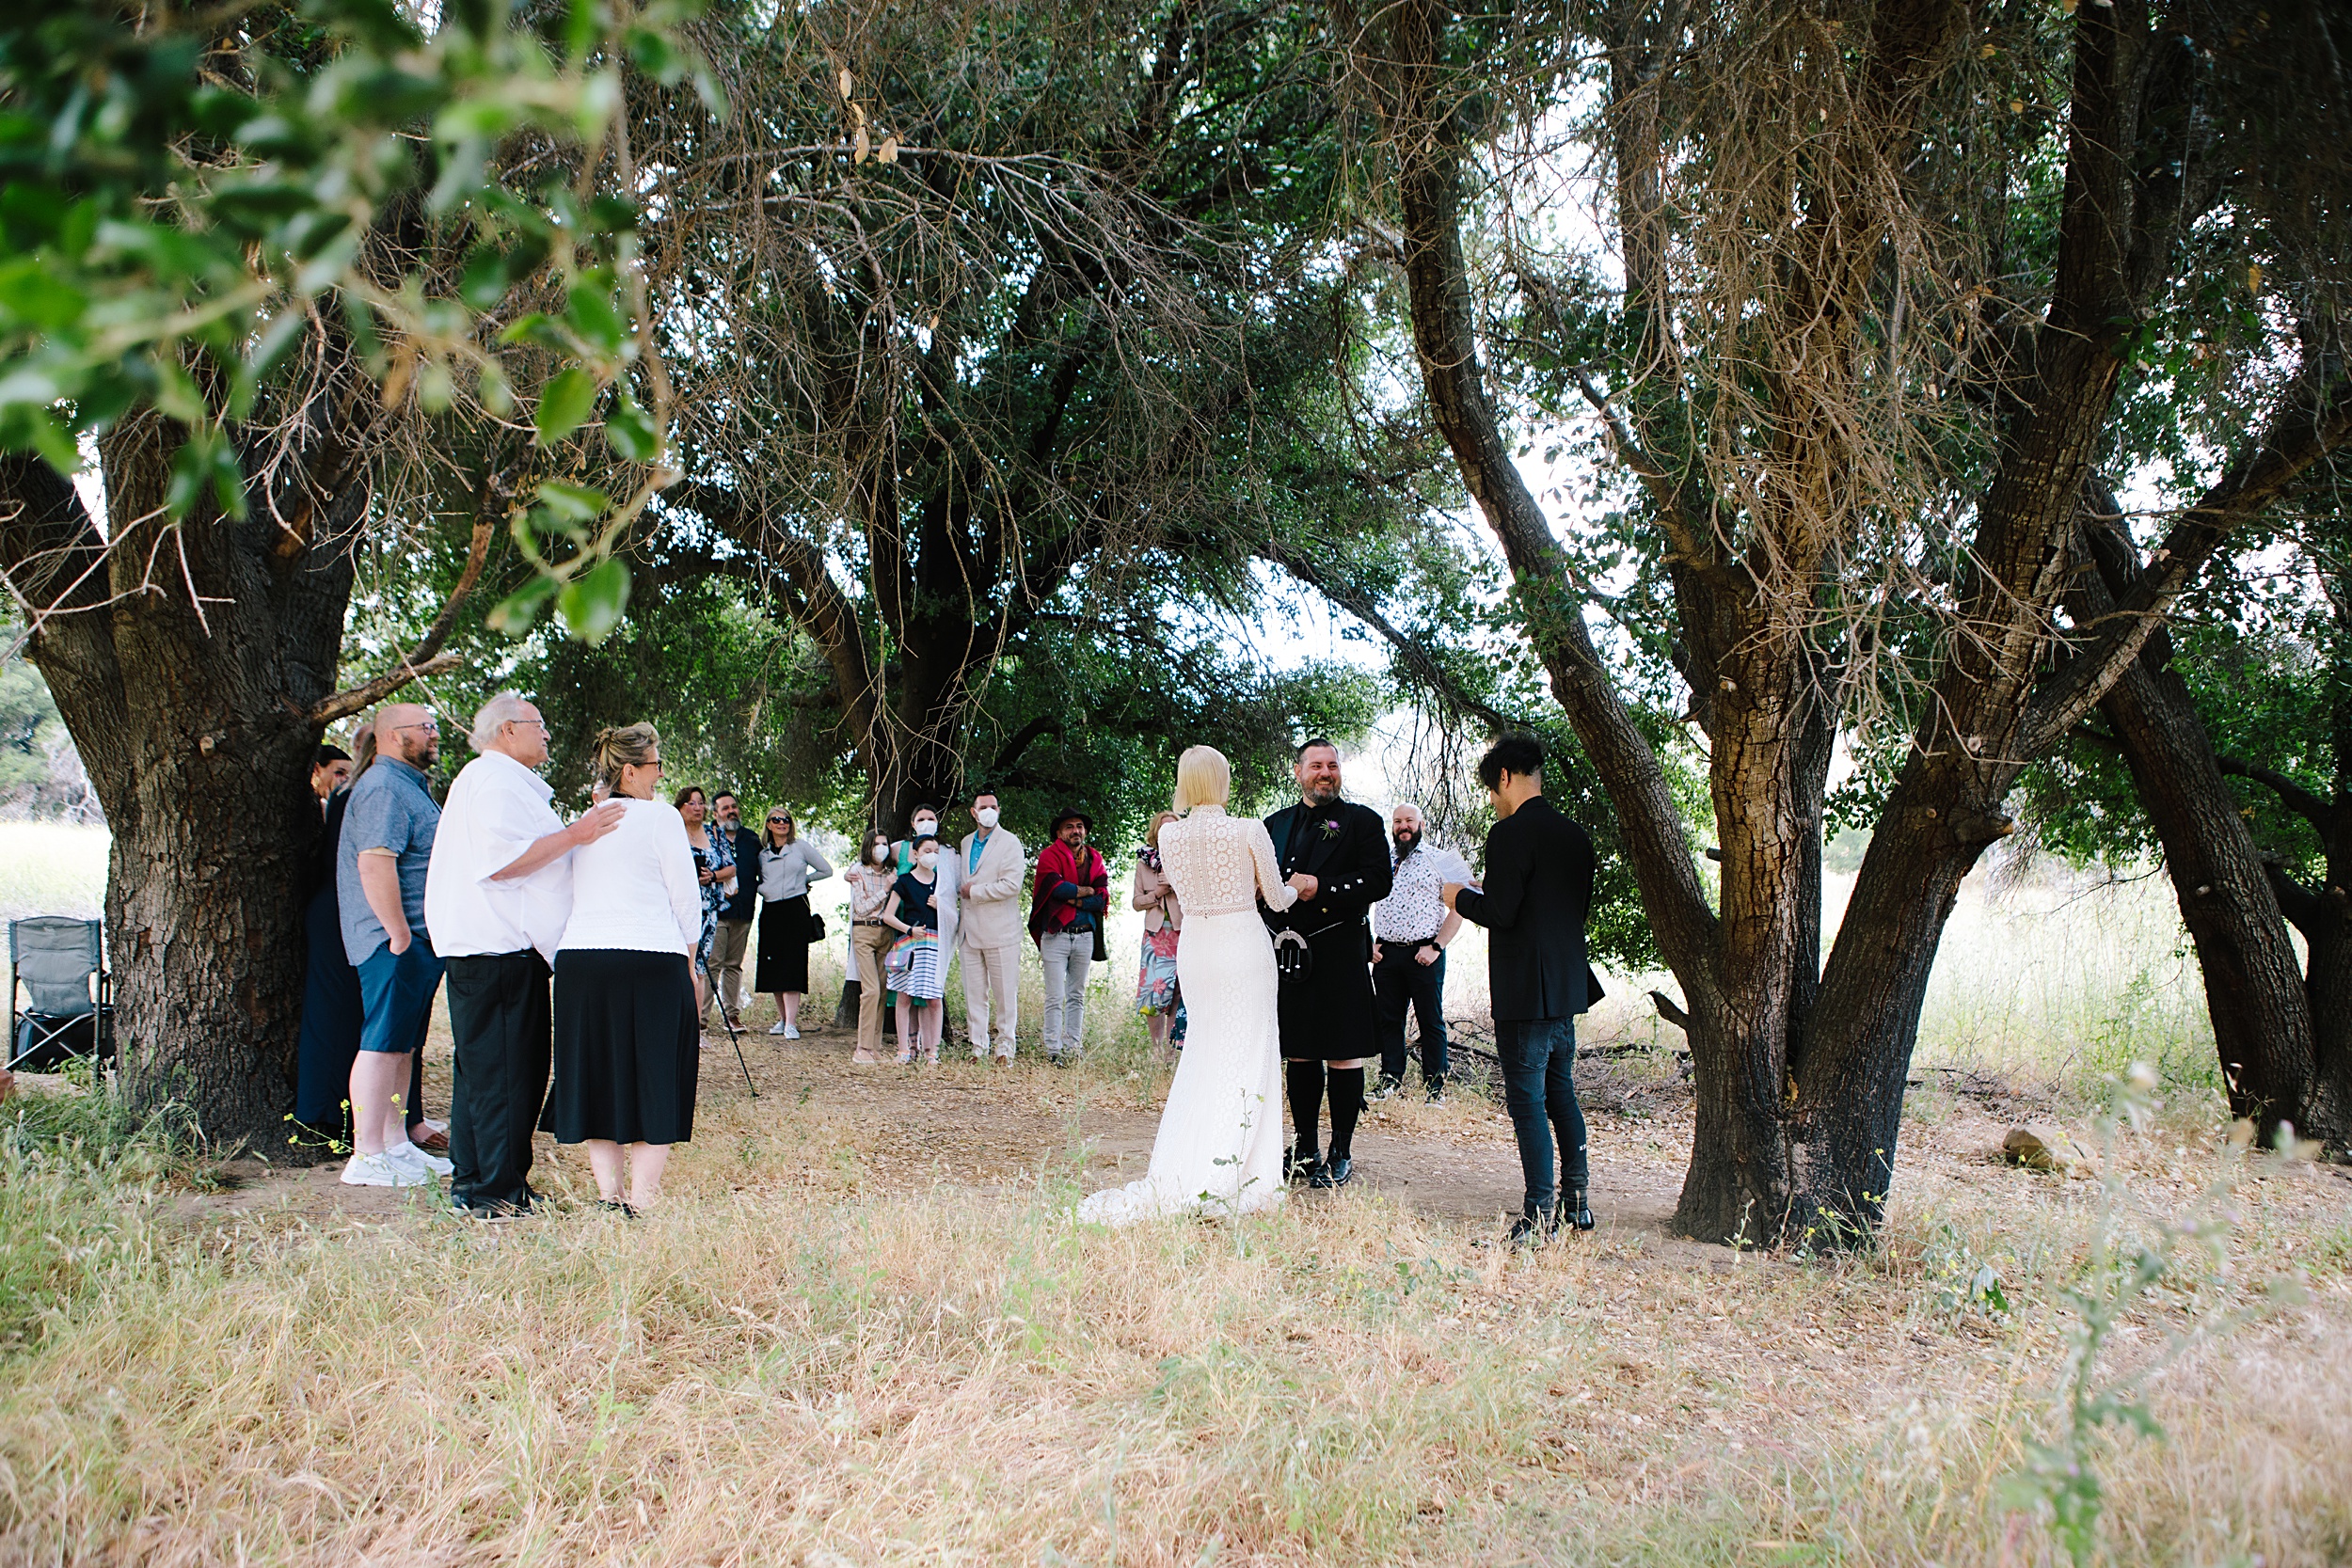 Molly-and-Brian_0021 Simple and Intimate Meadow Wedding with Family in Malibu, CA